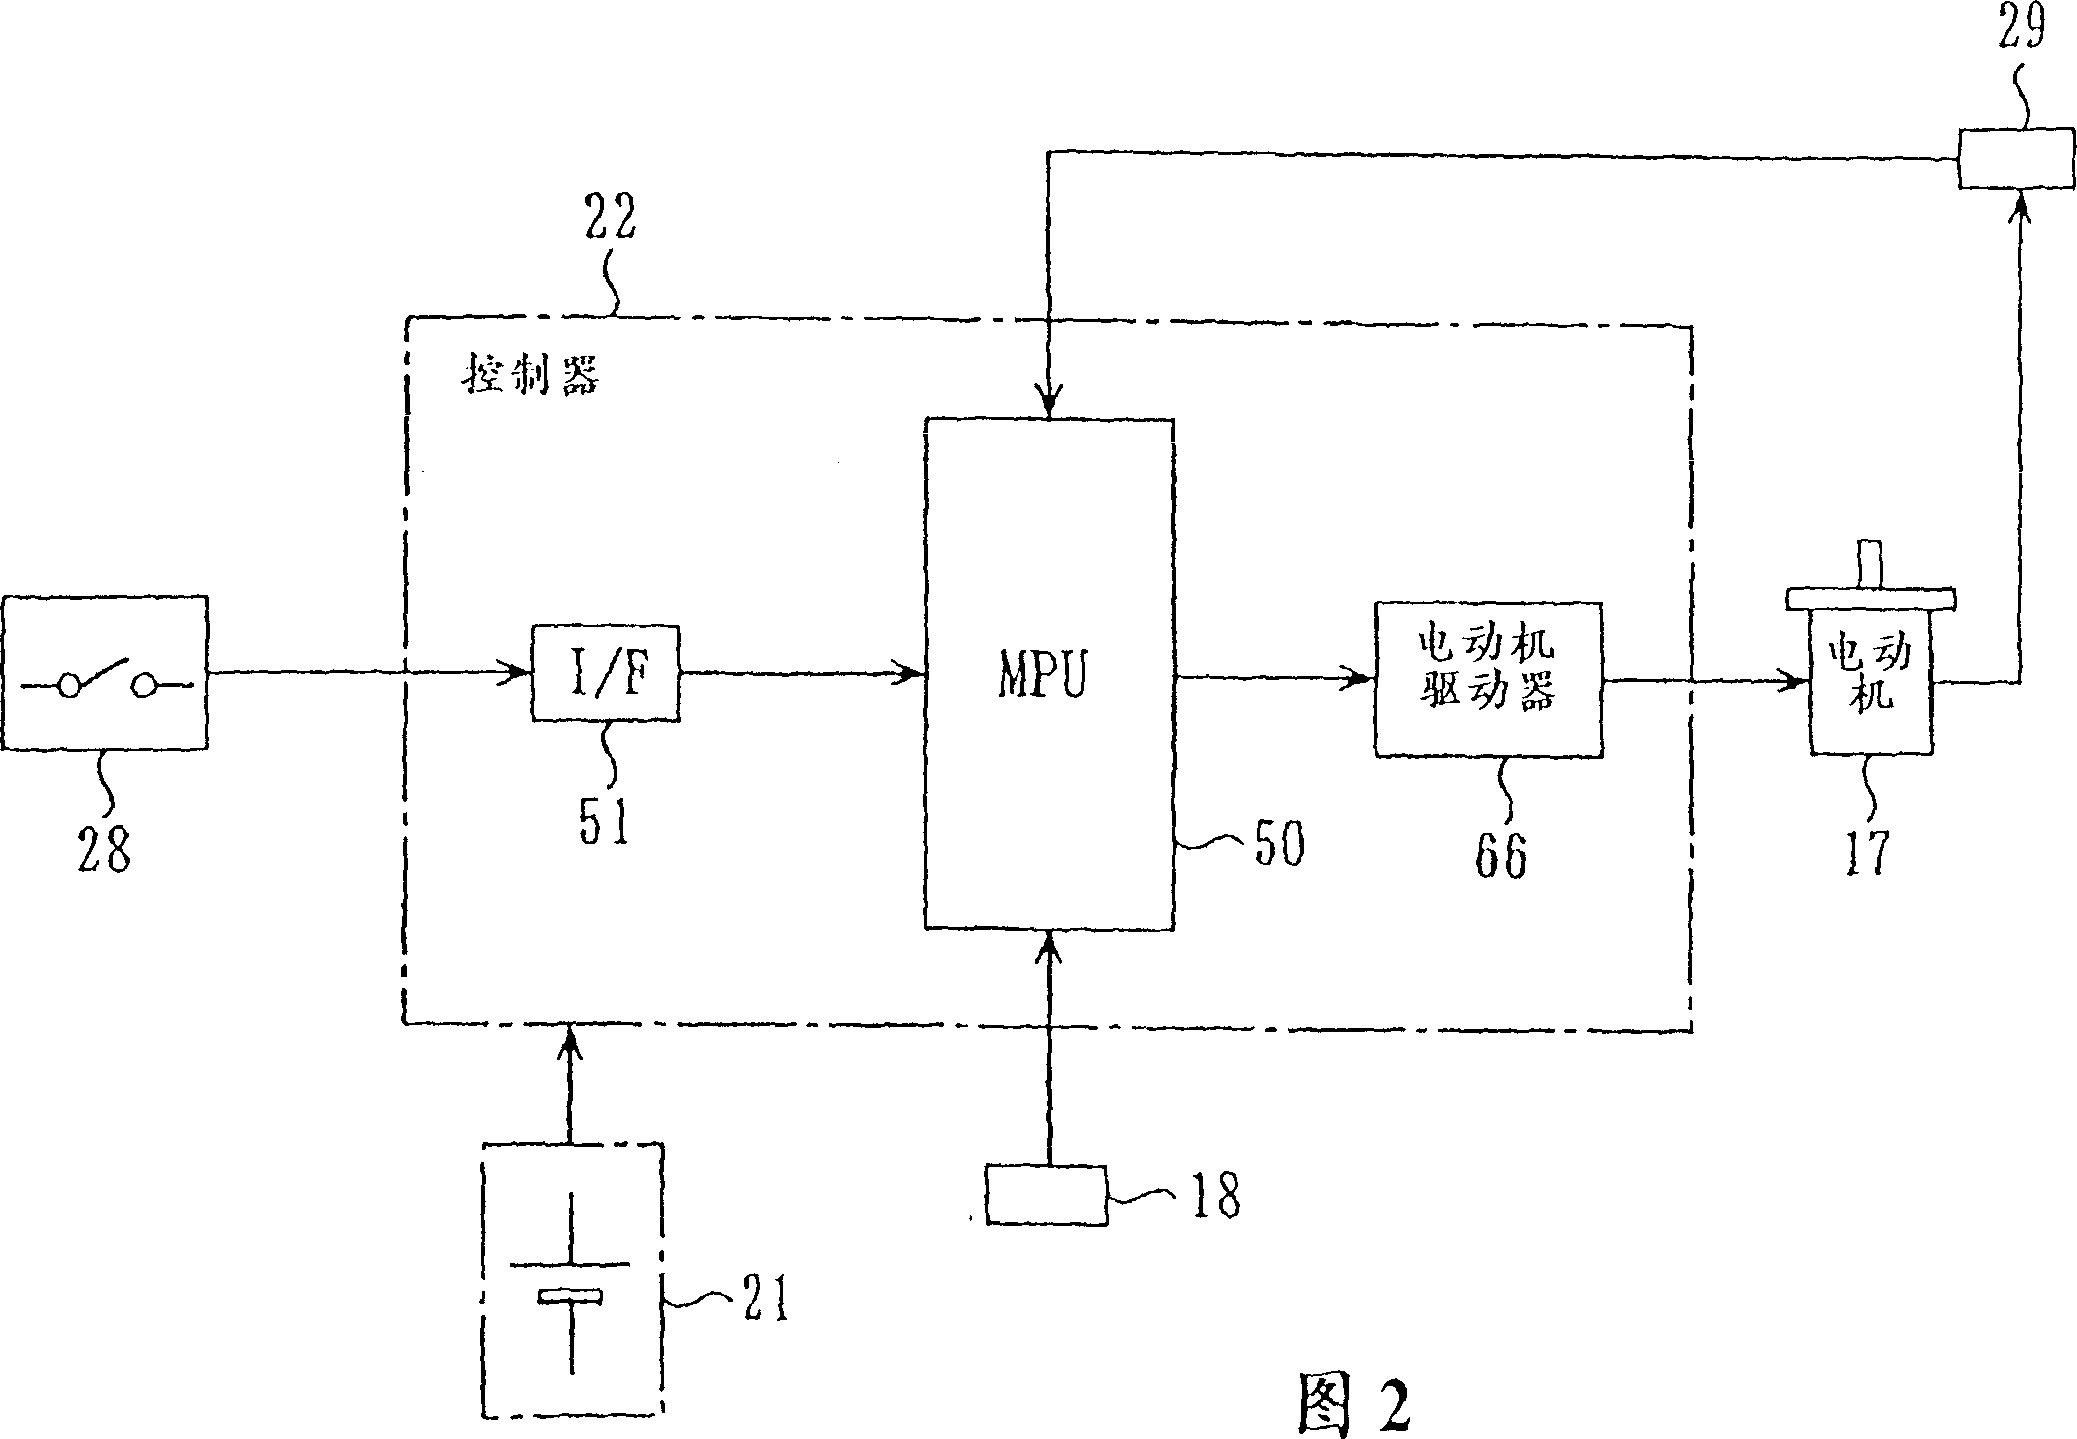 Auxiliary power driven vehicle